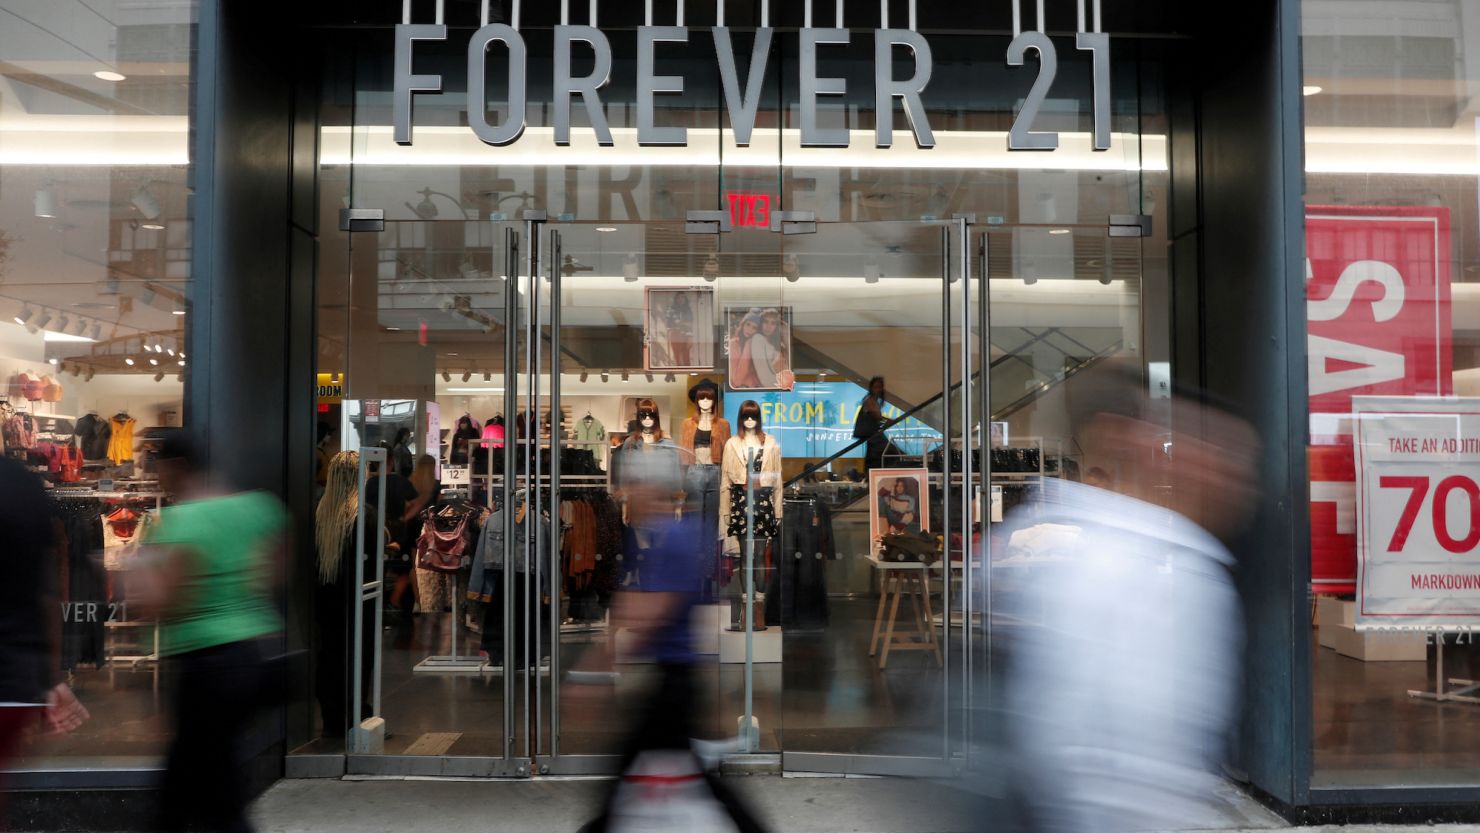 Students Shop Until They Drop at Forever 21